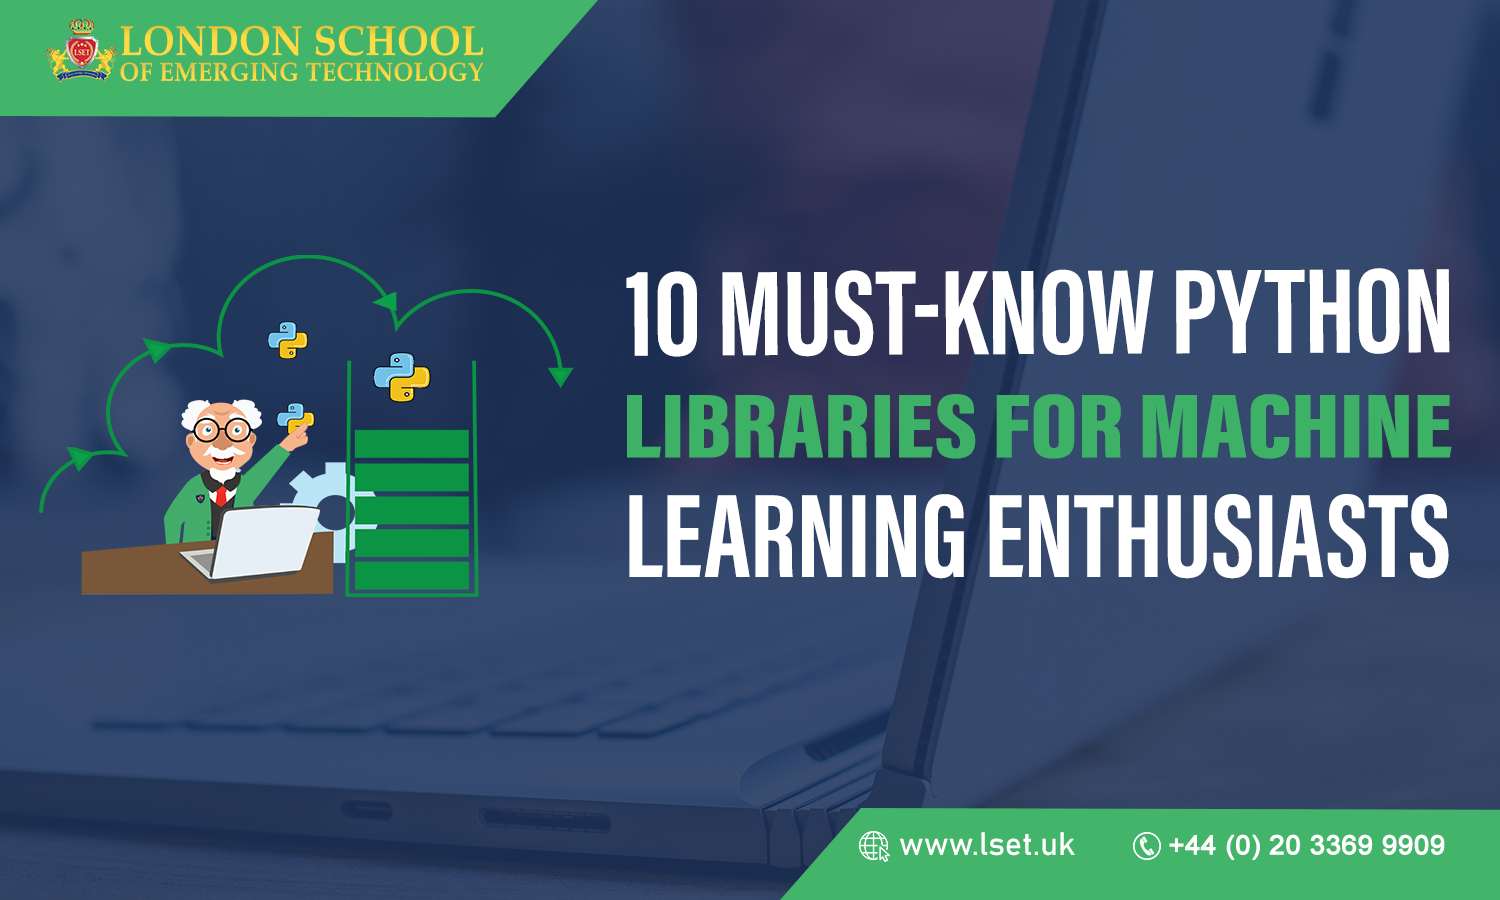 10 Must-Know Python Libraries for Machine Learning Enthusiasts 4.48.19 PM